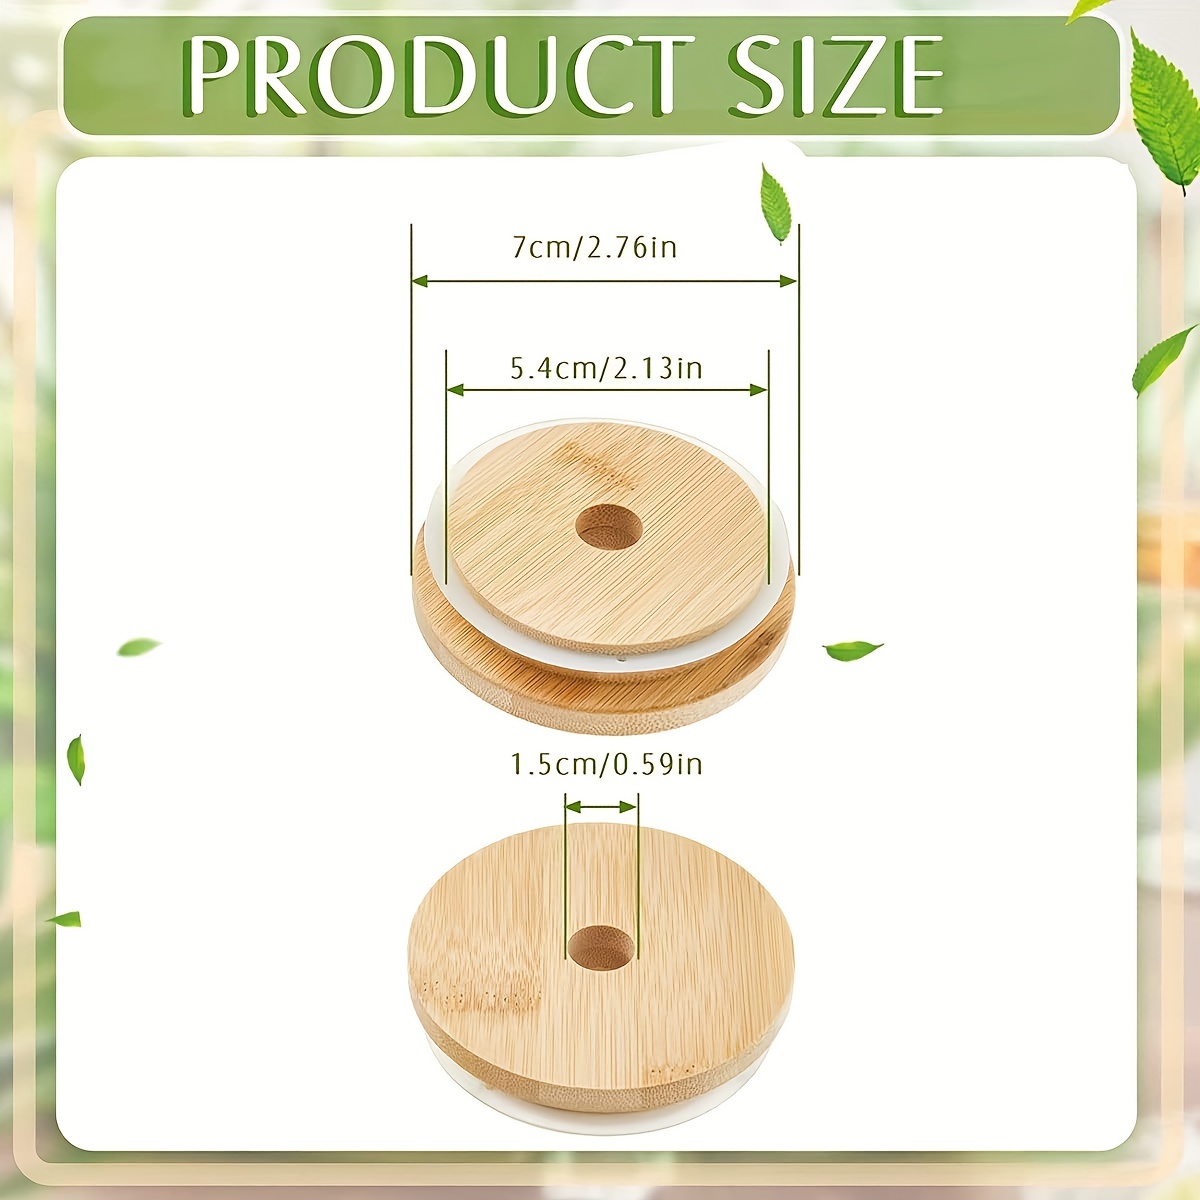 DOITOOL 8Pcs Bamboo Jar Lids with Straw Hole, Reusable Bamboo Lids for Beer  Can Glass, 70mm Bamboo Mason Jar Lids with Straw Hole for Wide Mouth Mason